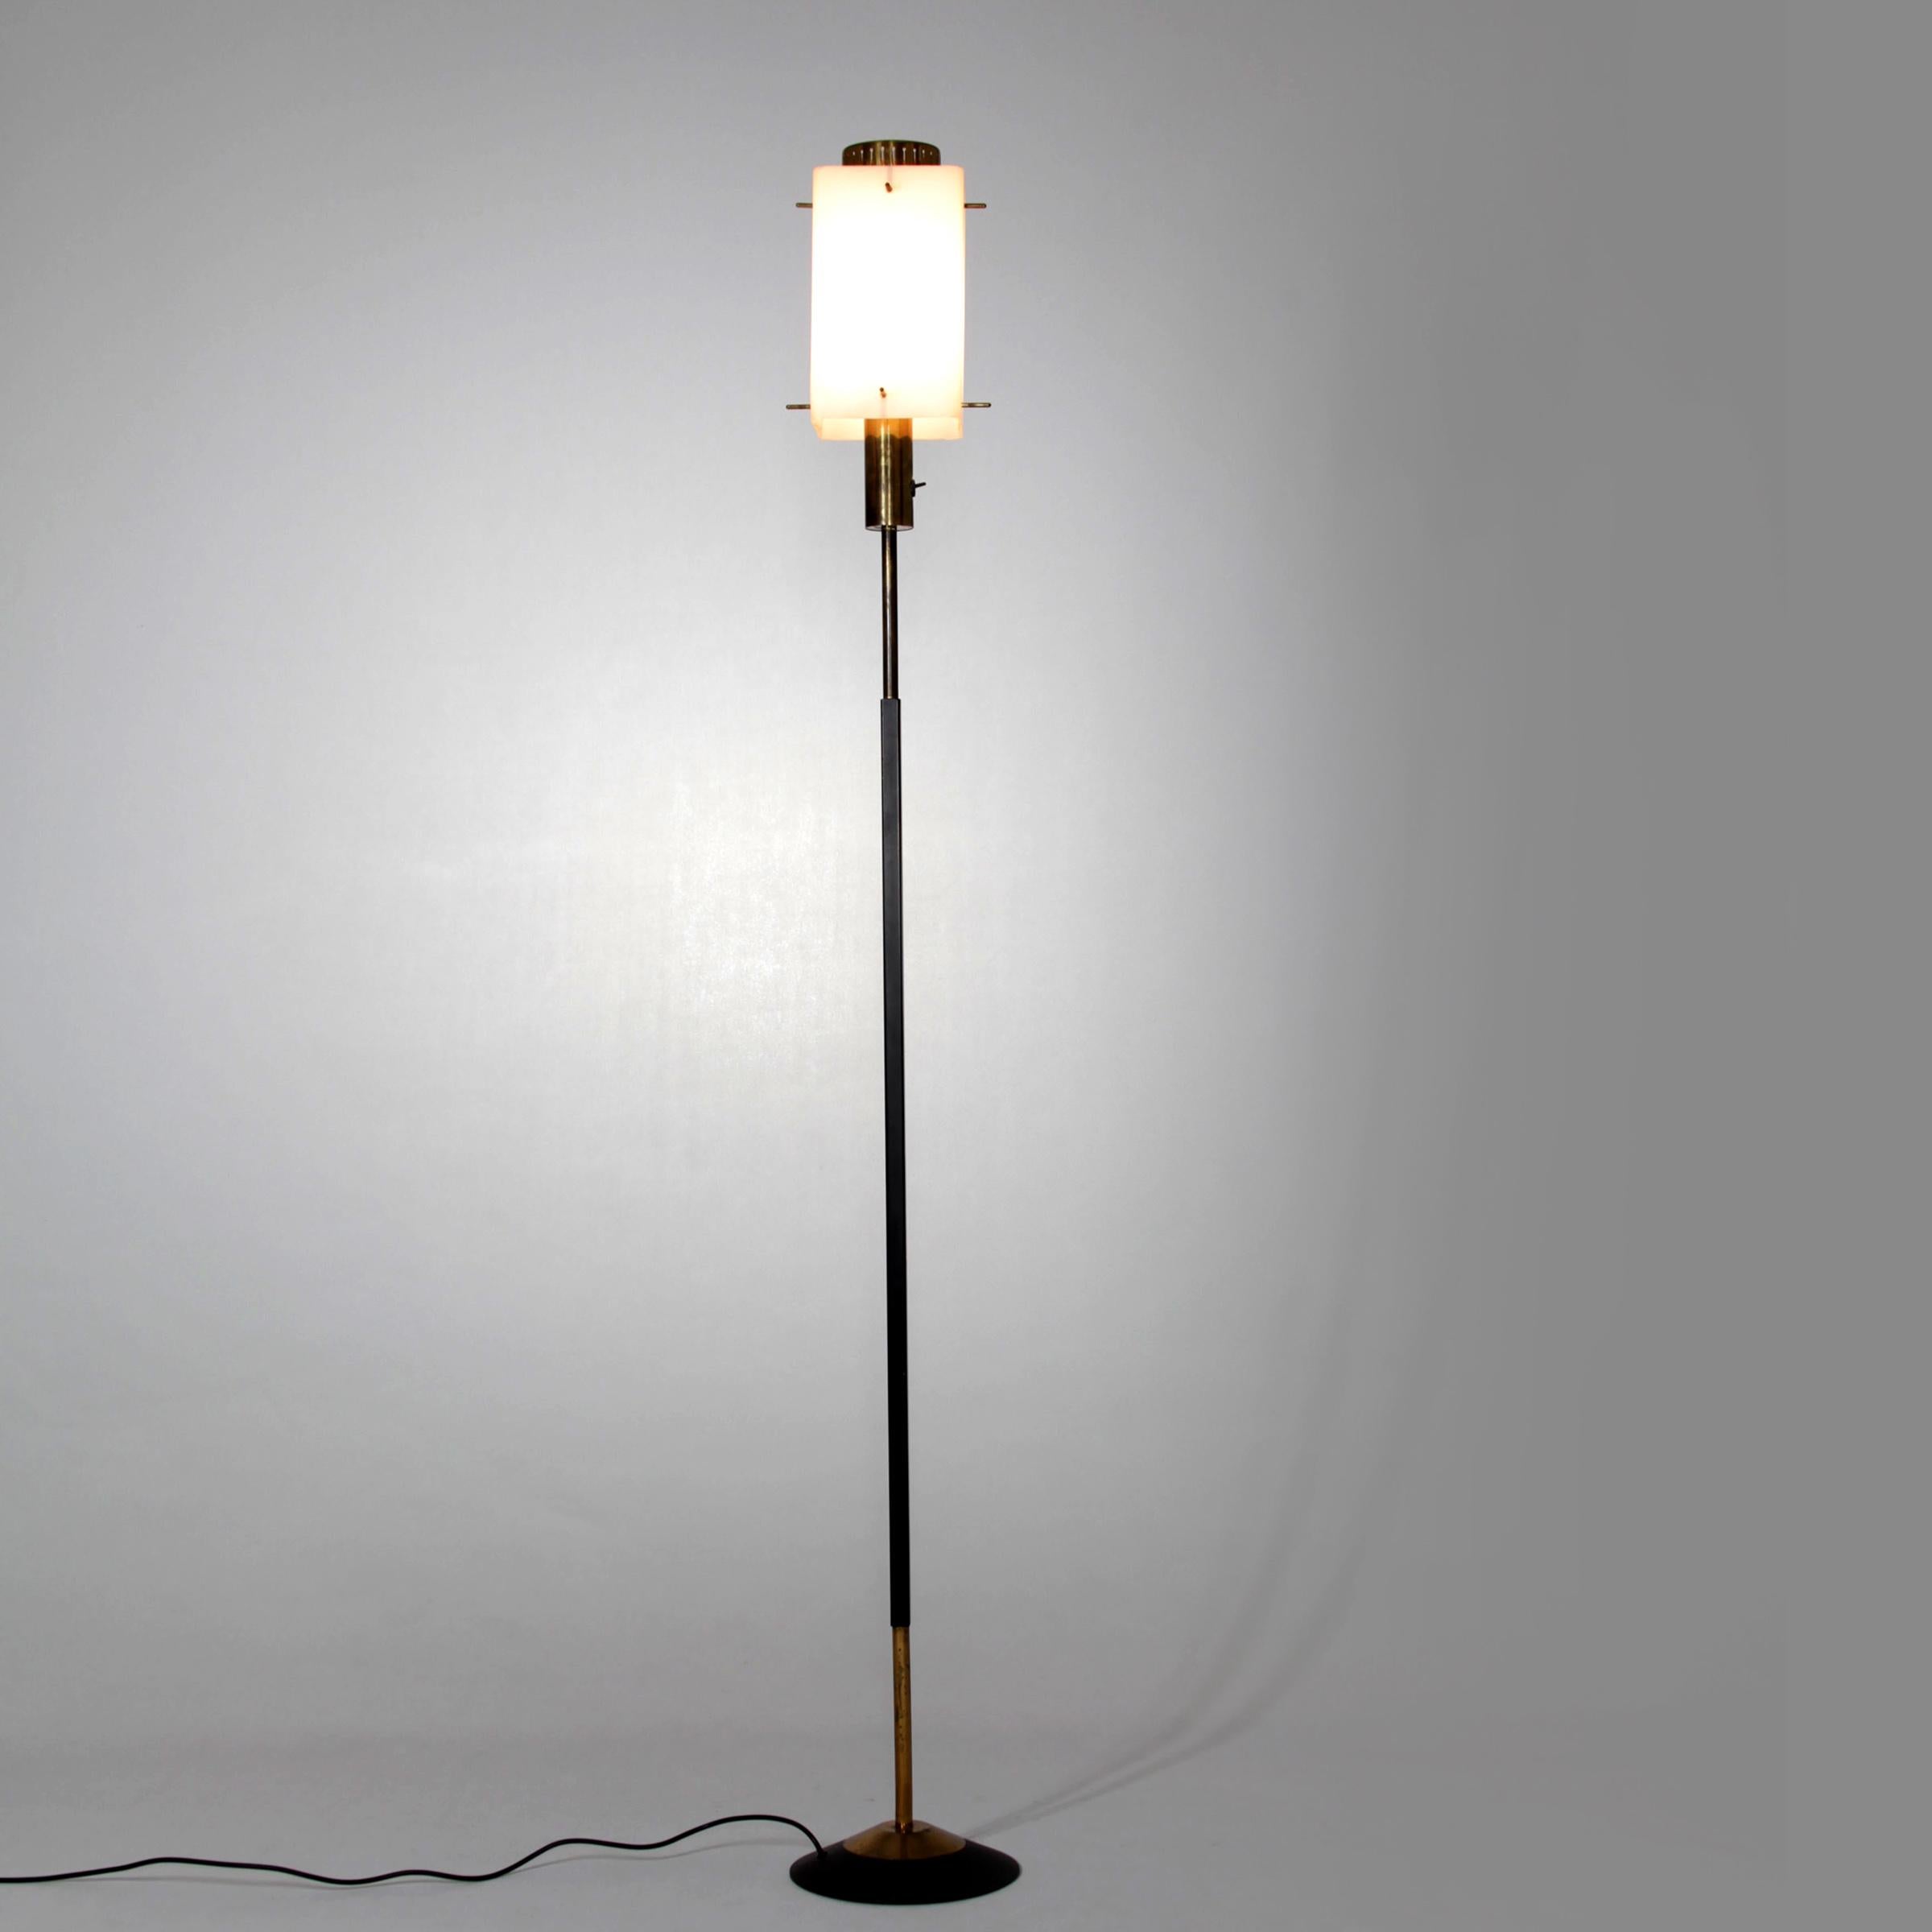 Floor lamp, Italy, 1950s. This lamp has an opaline glass shade, lacquered frame and brass elements.